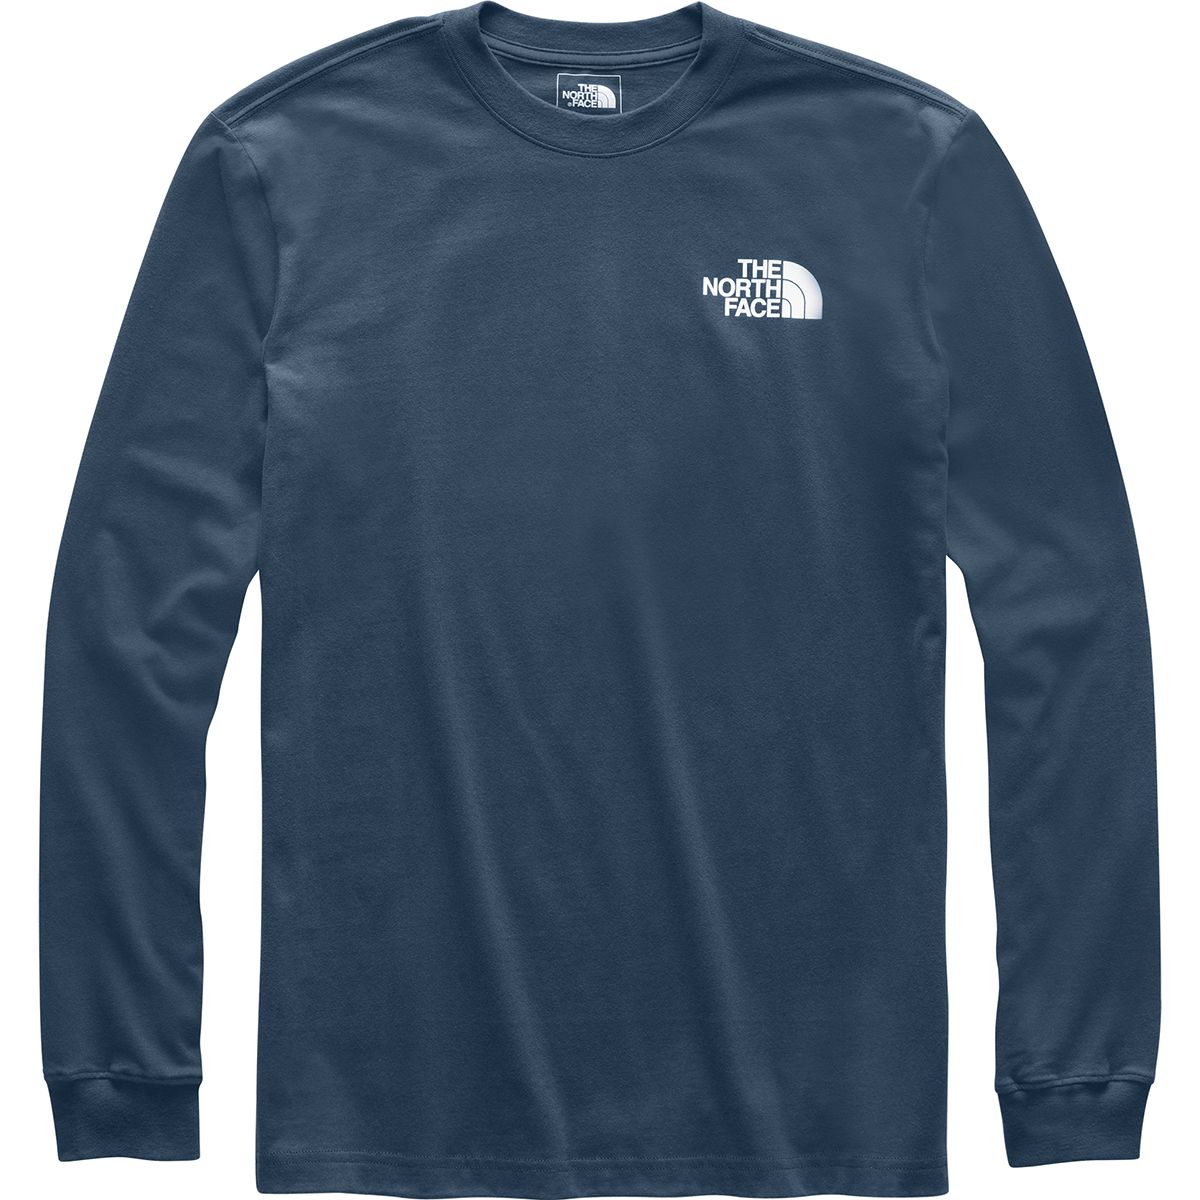 The North Face Red Box Long-Sleeve T-Shirt - Men's | Backcountry.com